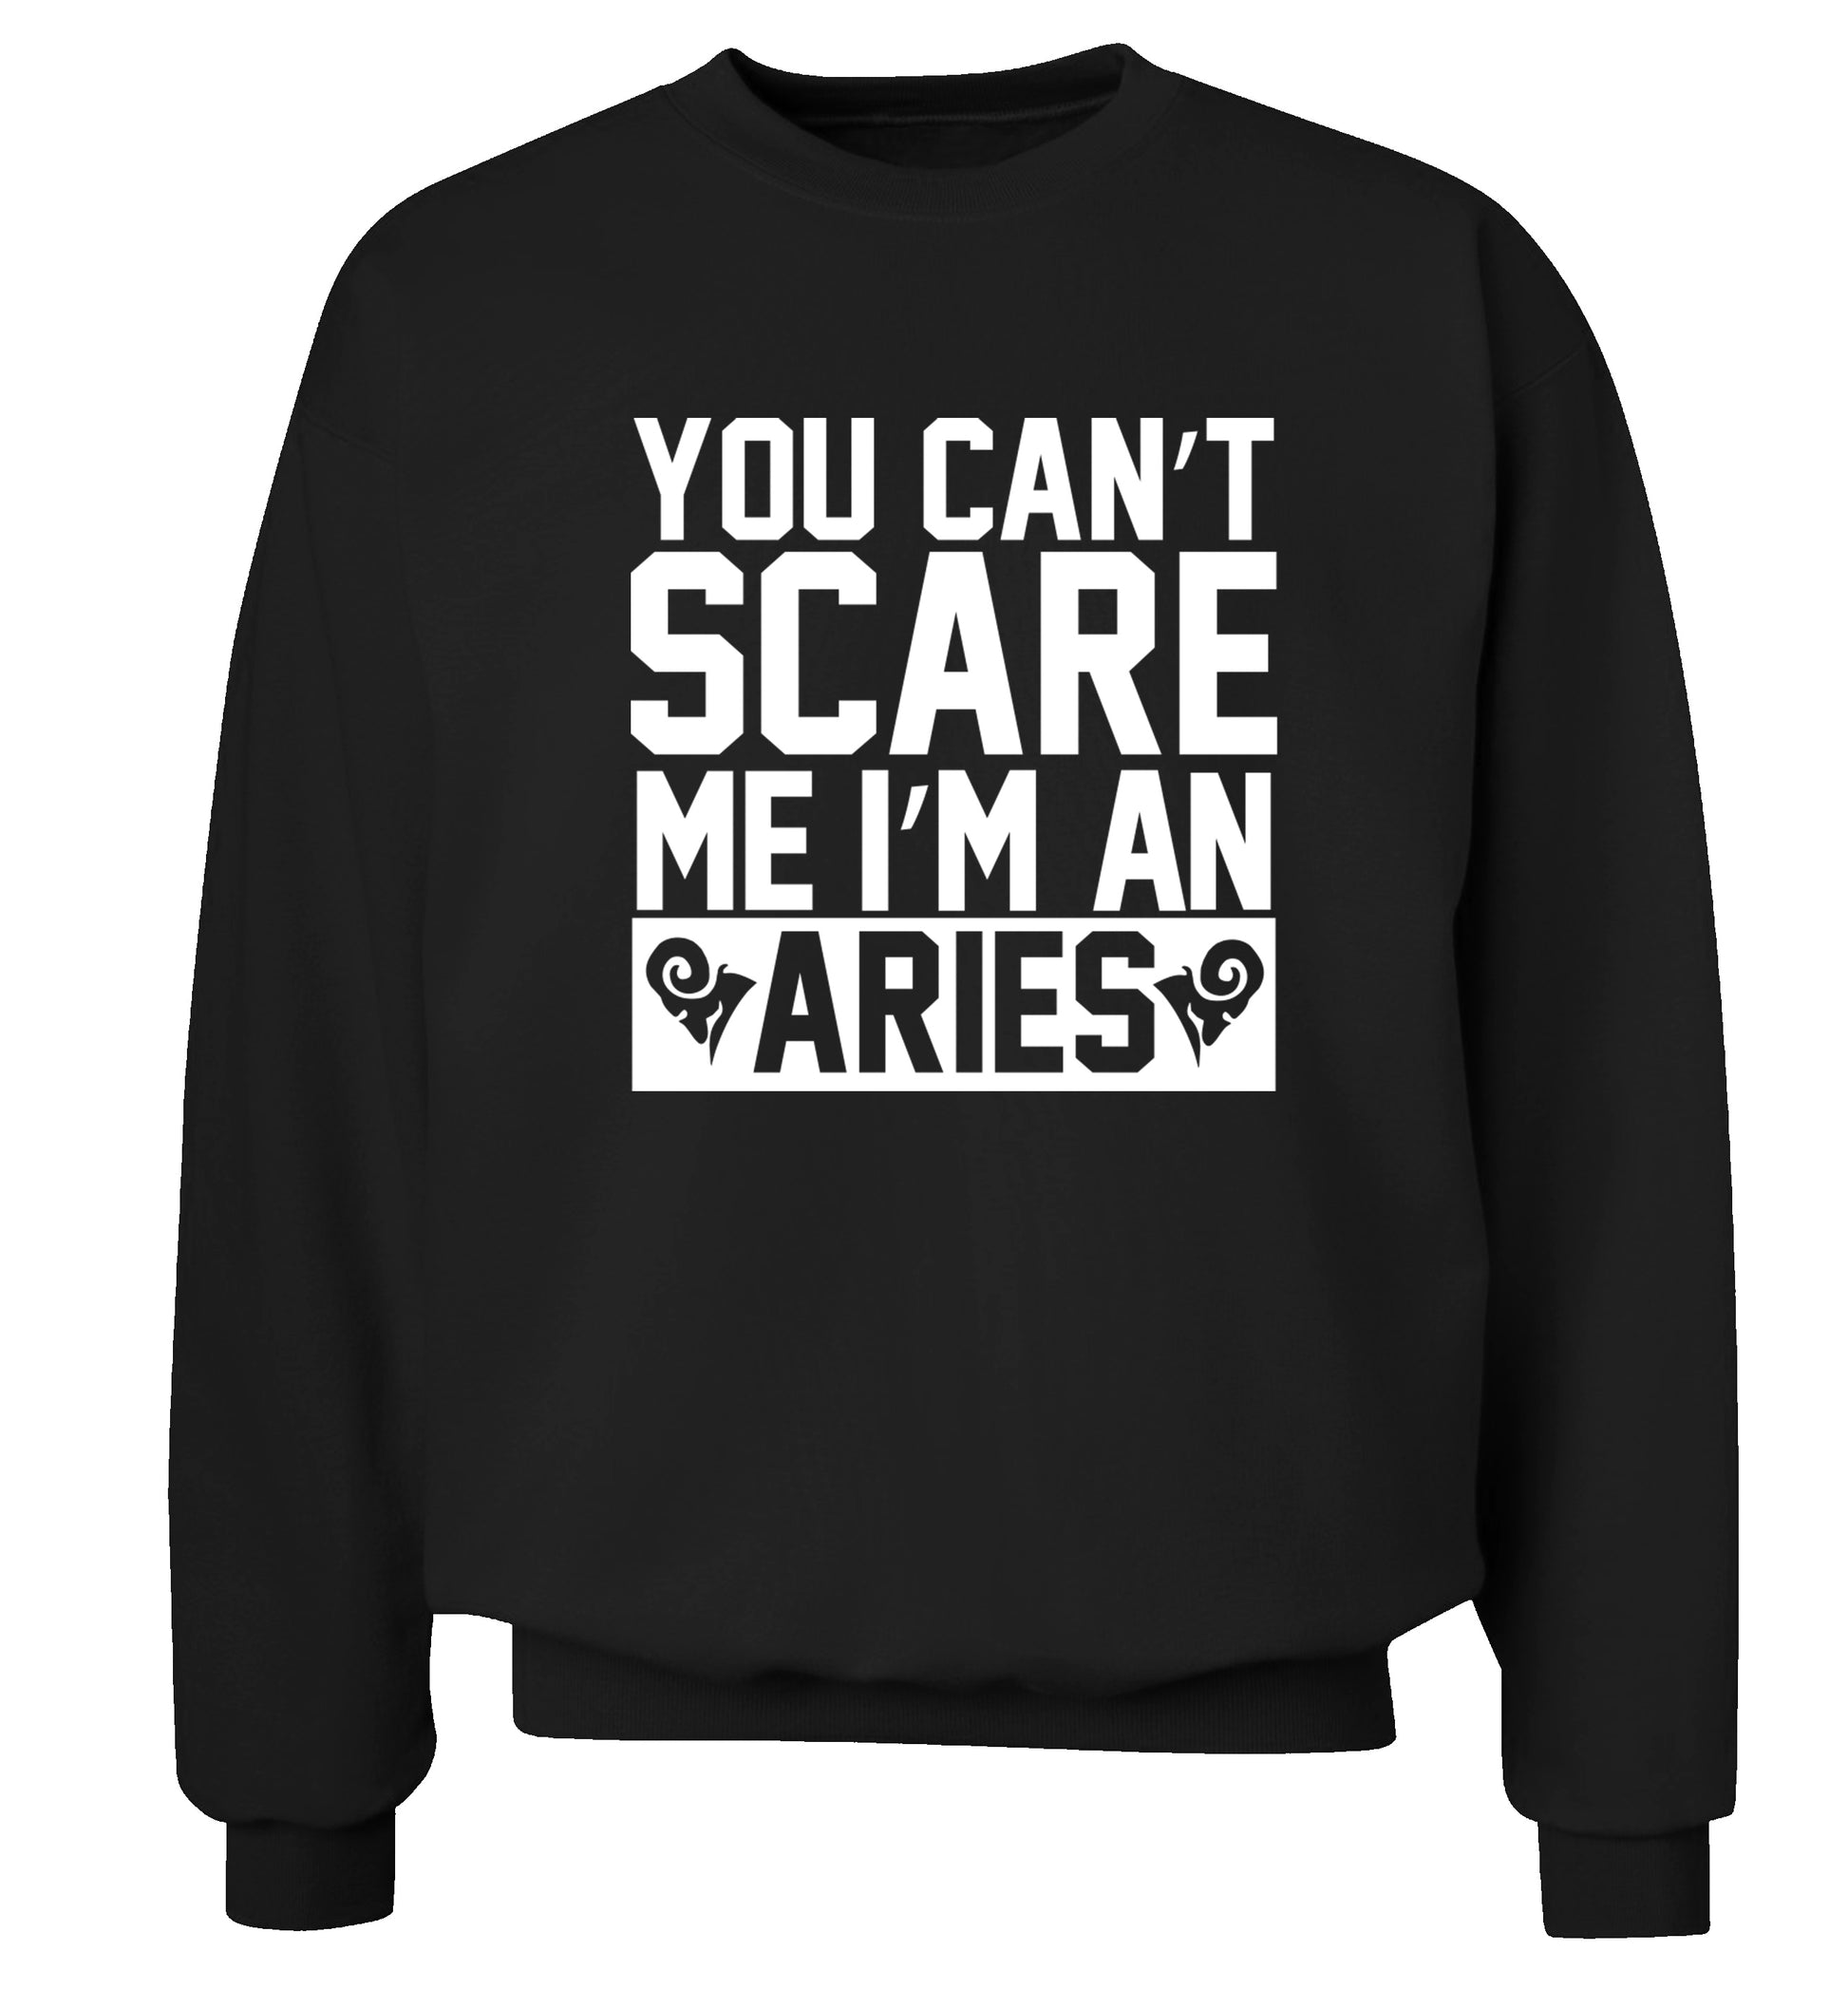 You can't scare me I'm an aries Adult's unisex black Sweater 2XL